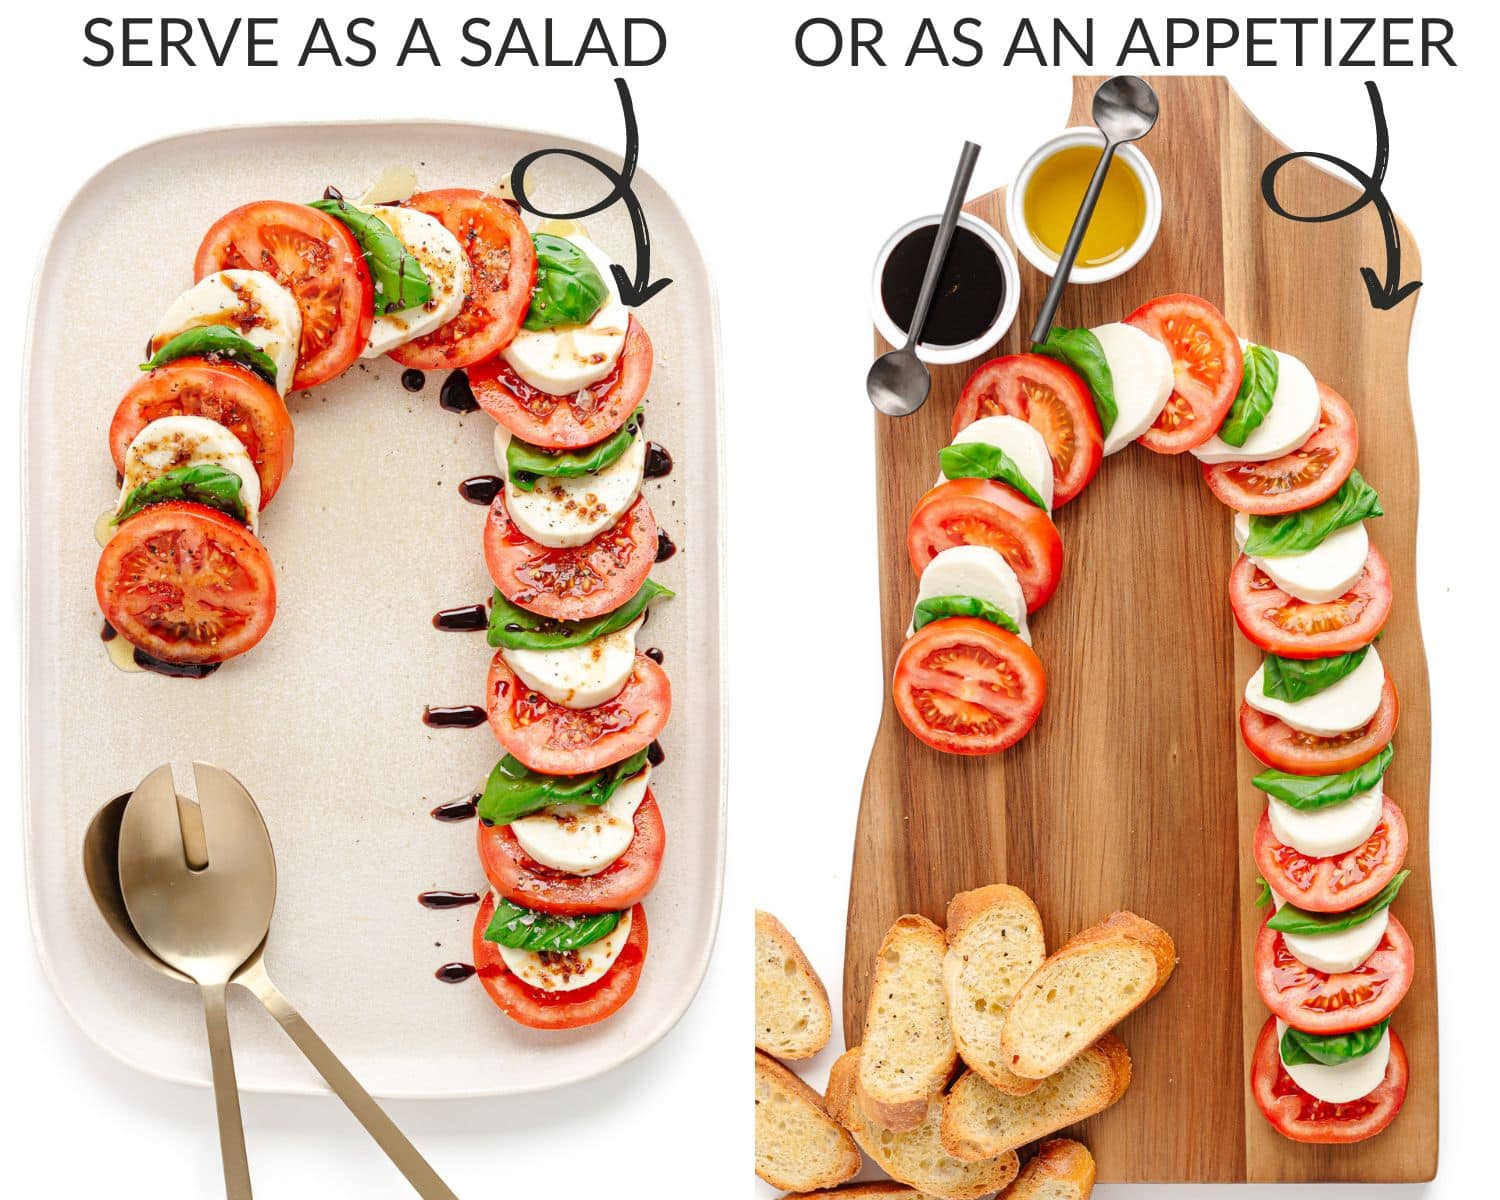 Labelled photo collage showing two ways to serve a Christmas Caprese: as a salad and as an appetizer board.